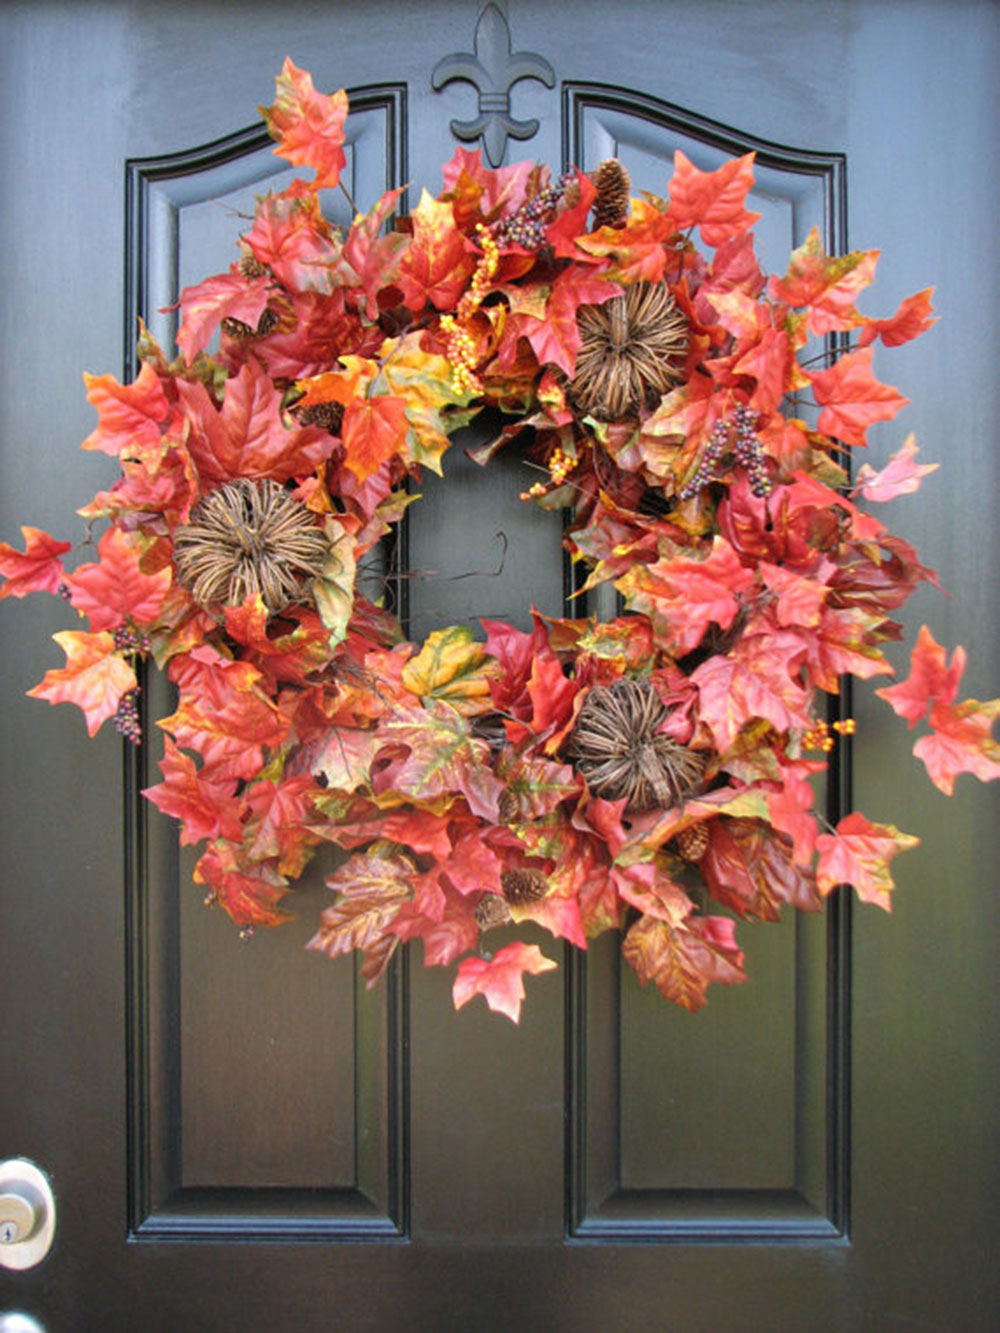 Fall-Wreaths-for-Front-Door-Decorating-by-Twoinspireyou Modern Halloween décor that you can try in your house